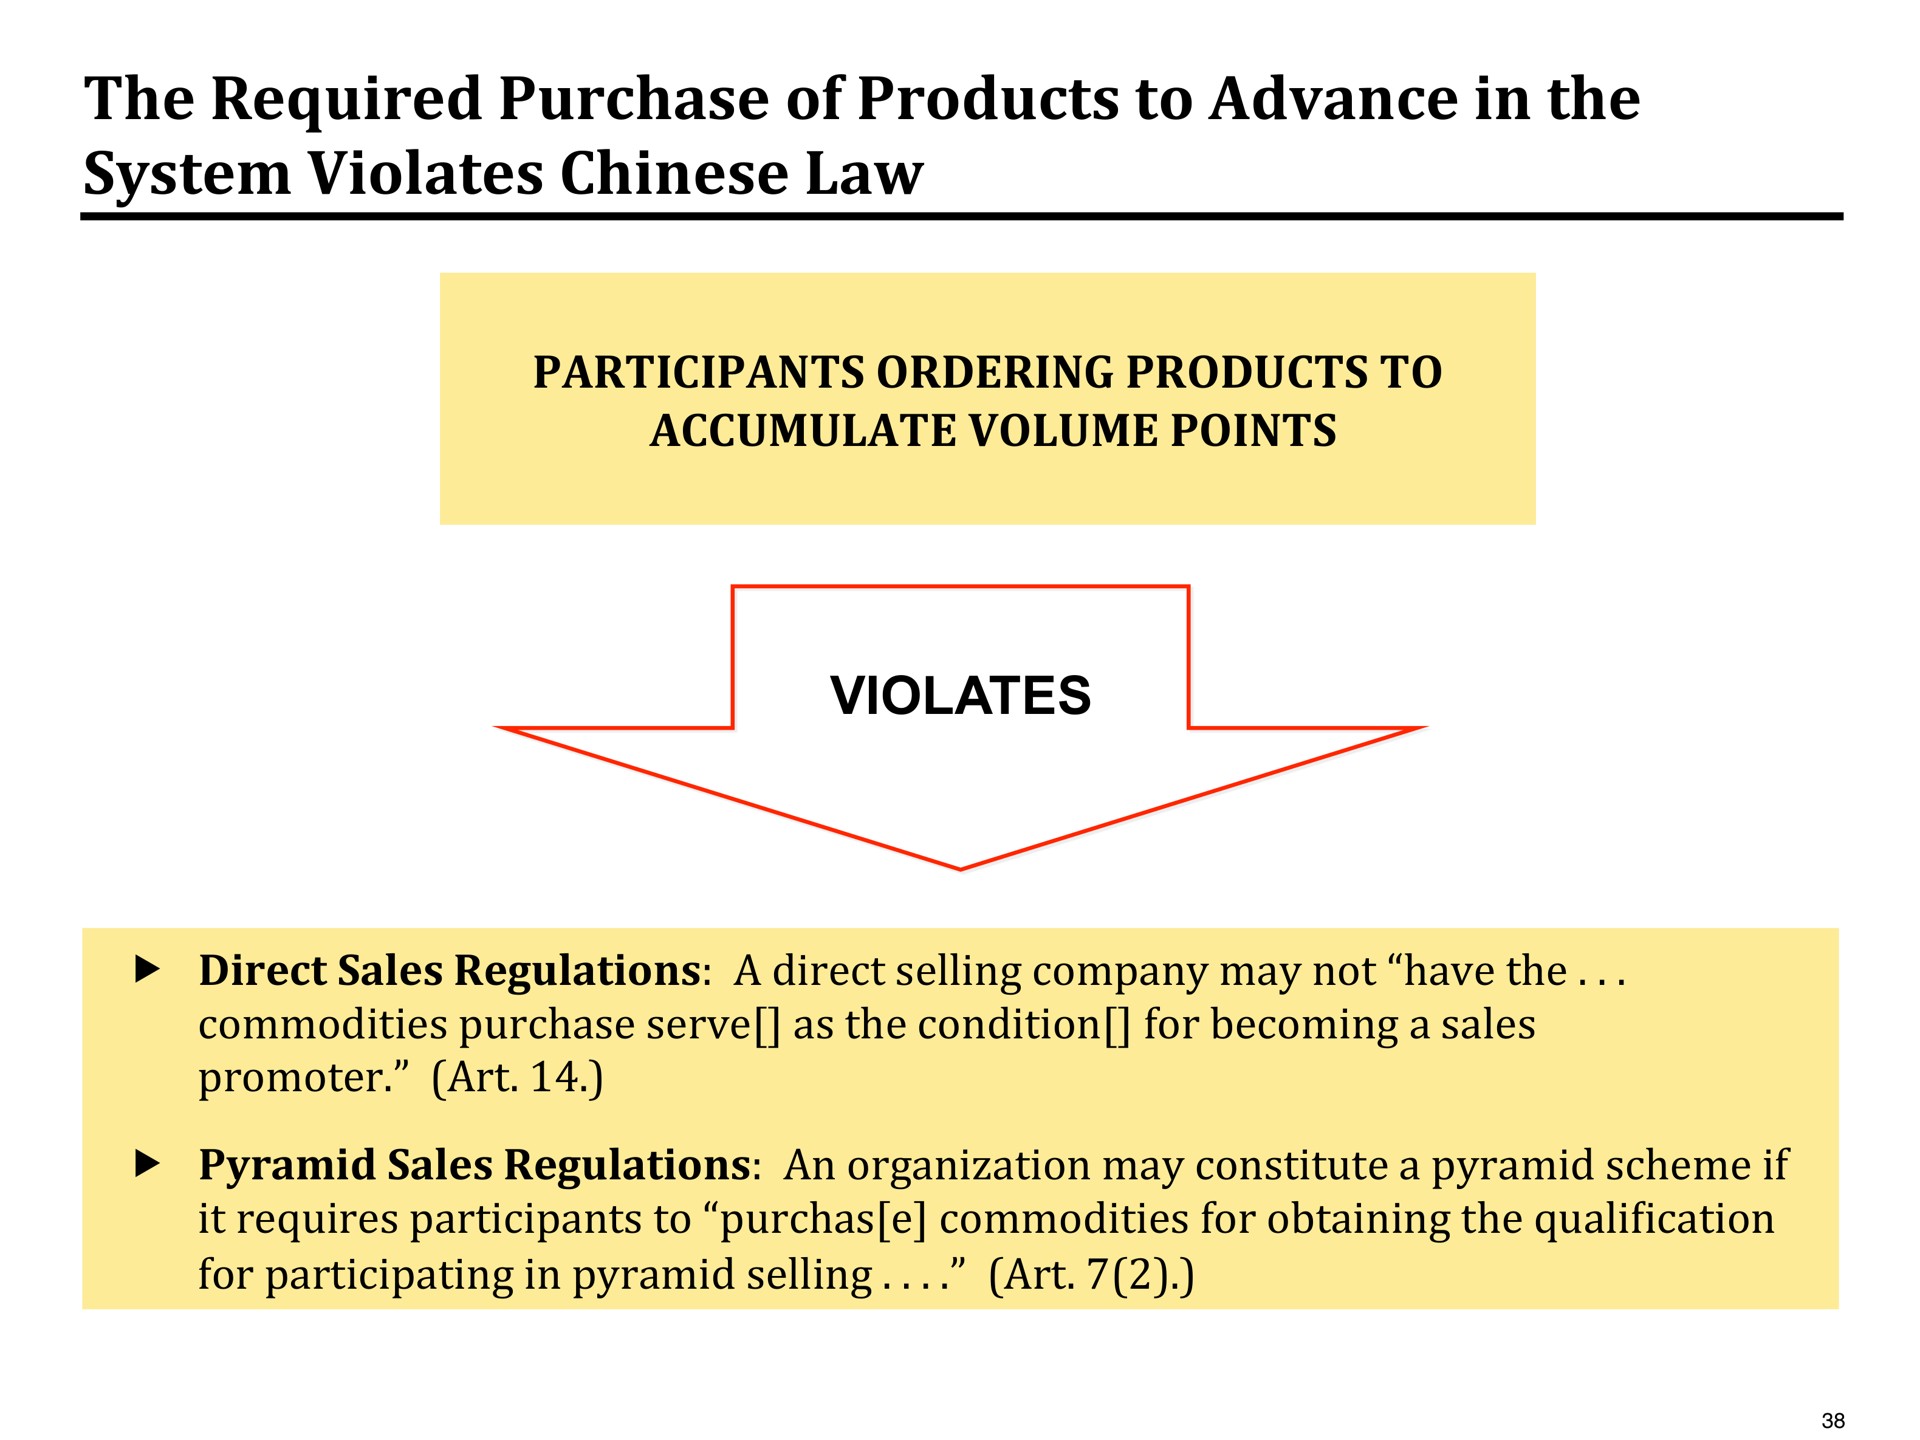 the required purchase of products to advance in the system violates law | Pershing Square